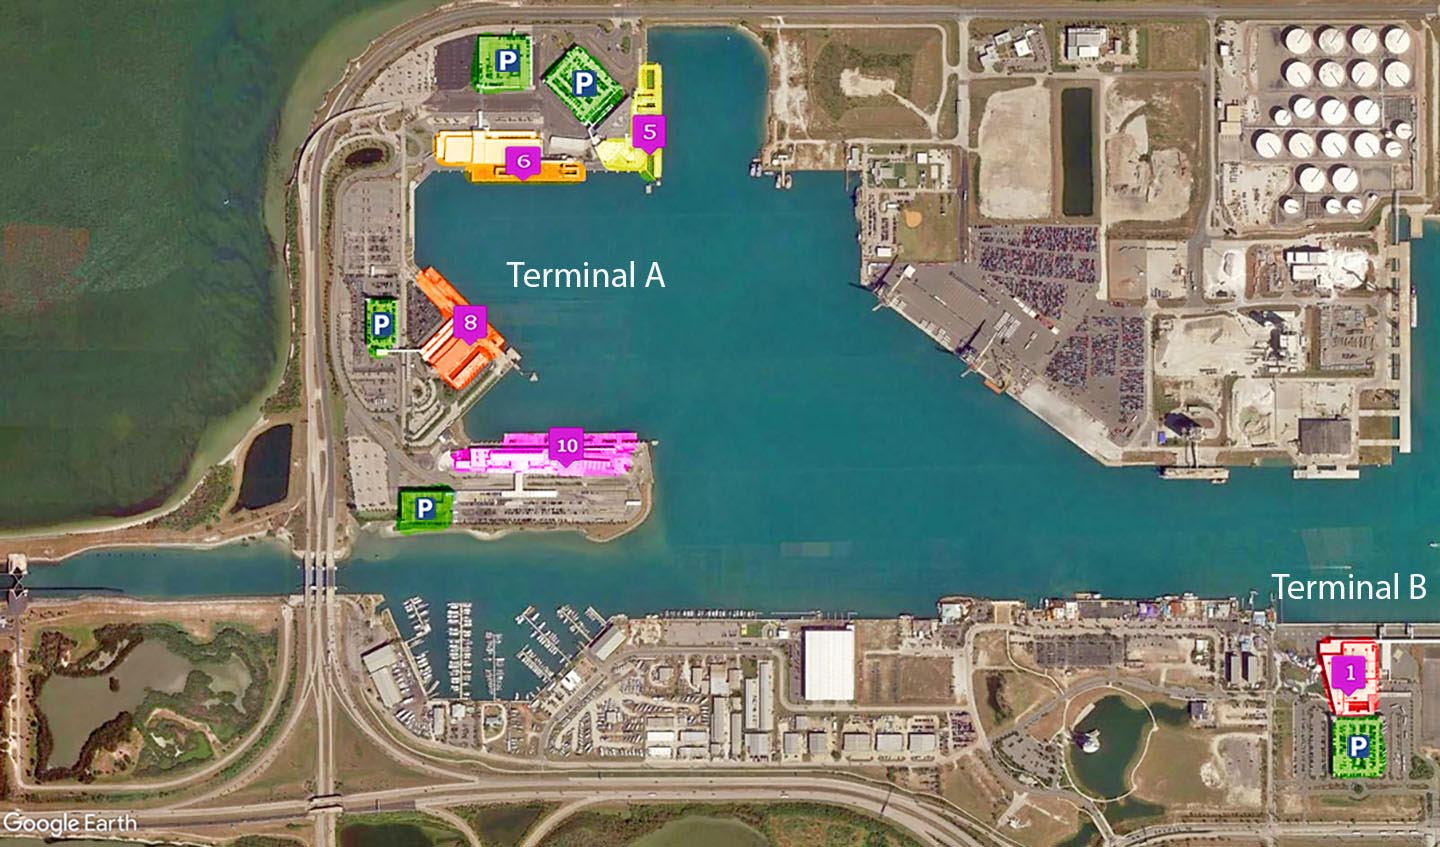 Where is my Ship docked at Port Canaveral in Cape Canaveral - Cruise Ship Locator - Let's See